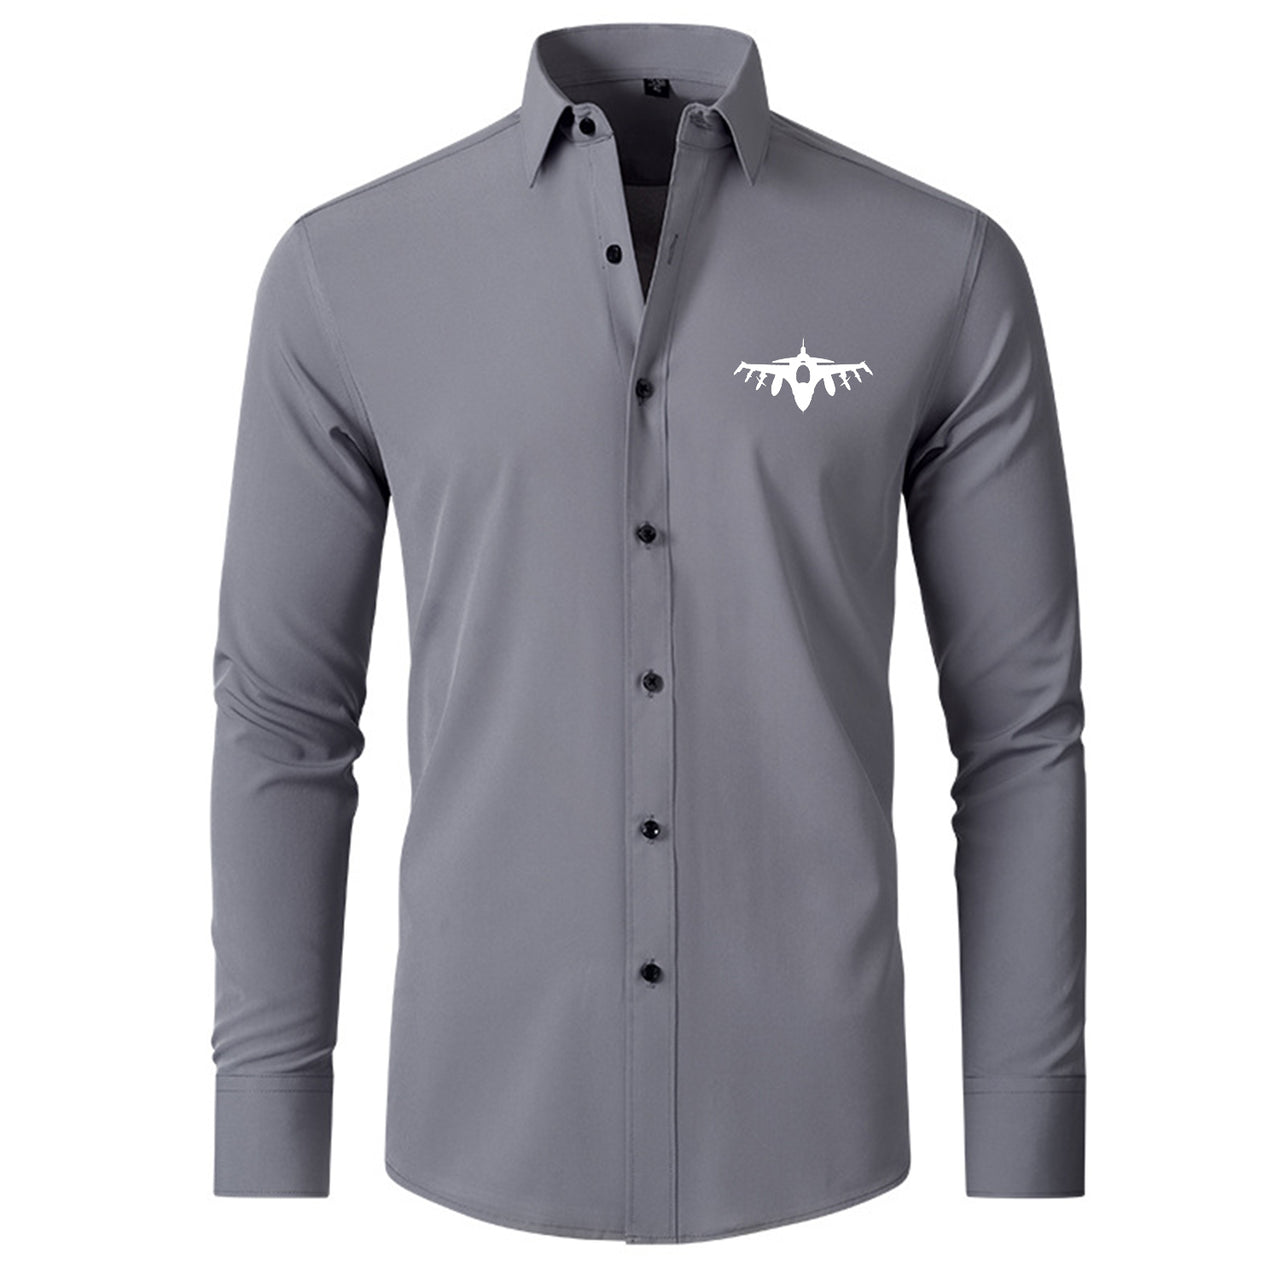 Fighting Falcon F16 Silhouette Designed Long Sleeve Shirts